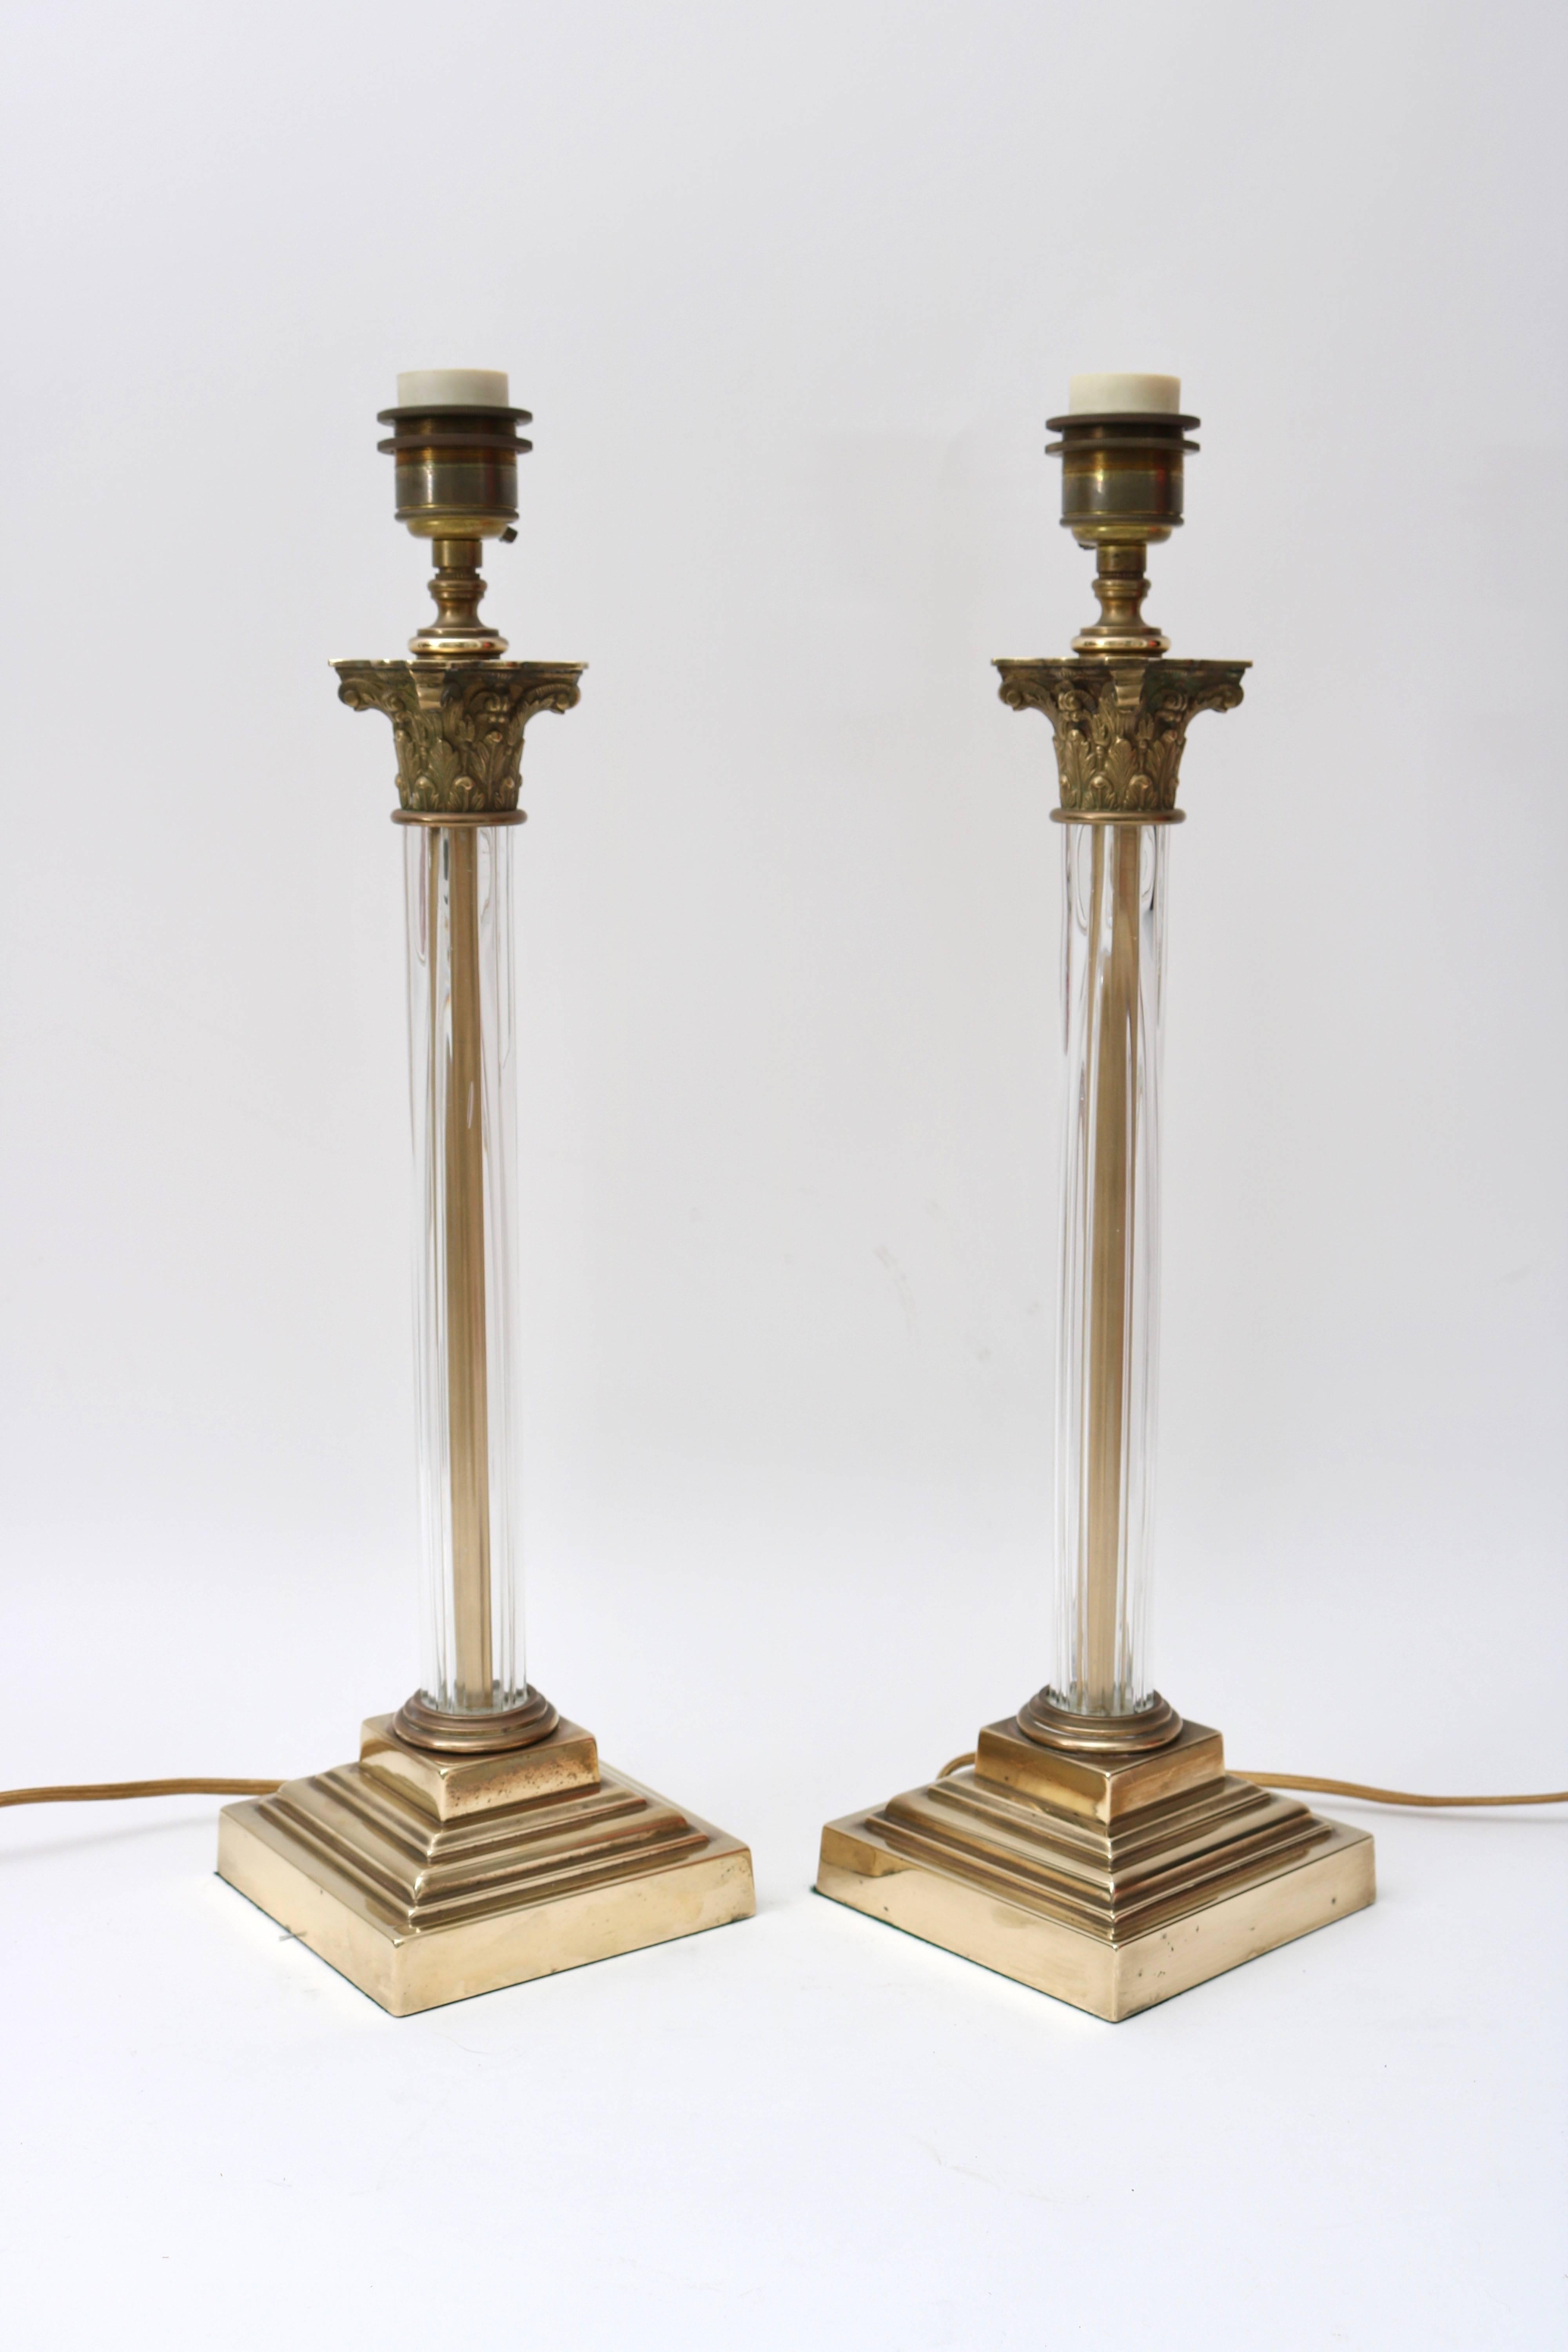 This pair of bronze column-form, Corinthian capital table lamps have recently been restored with new wiring and polishing. 
